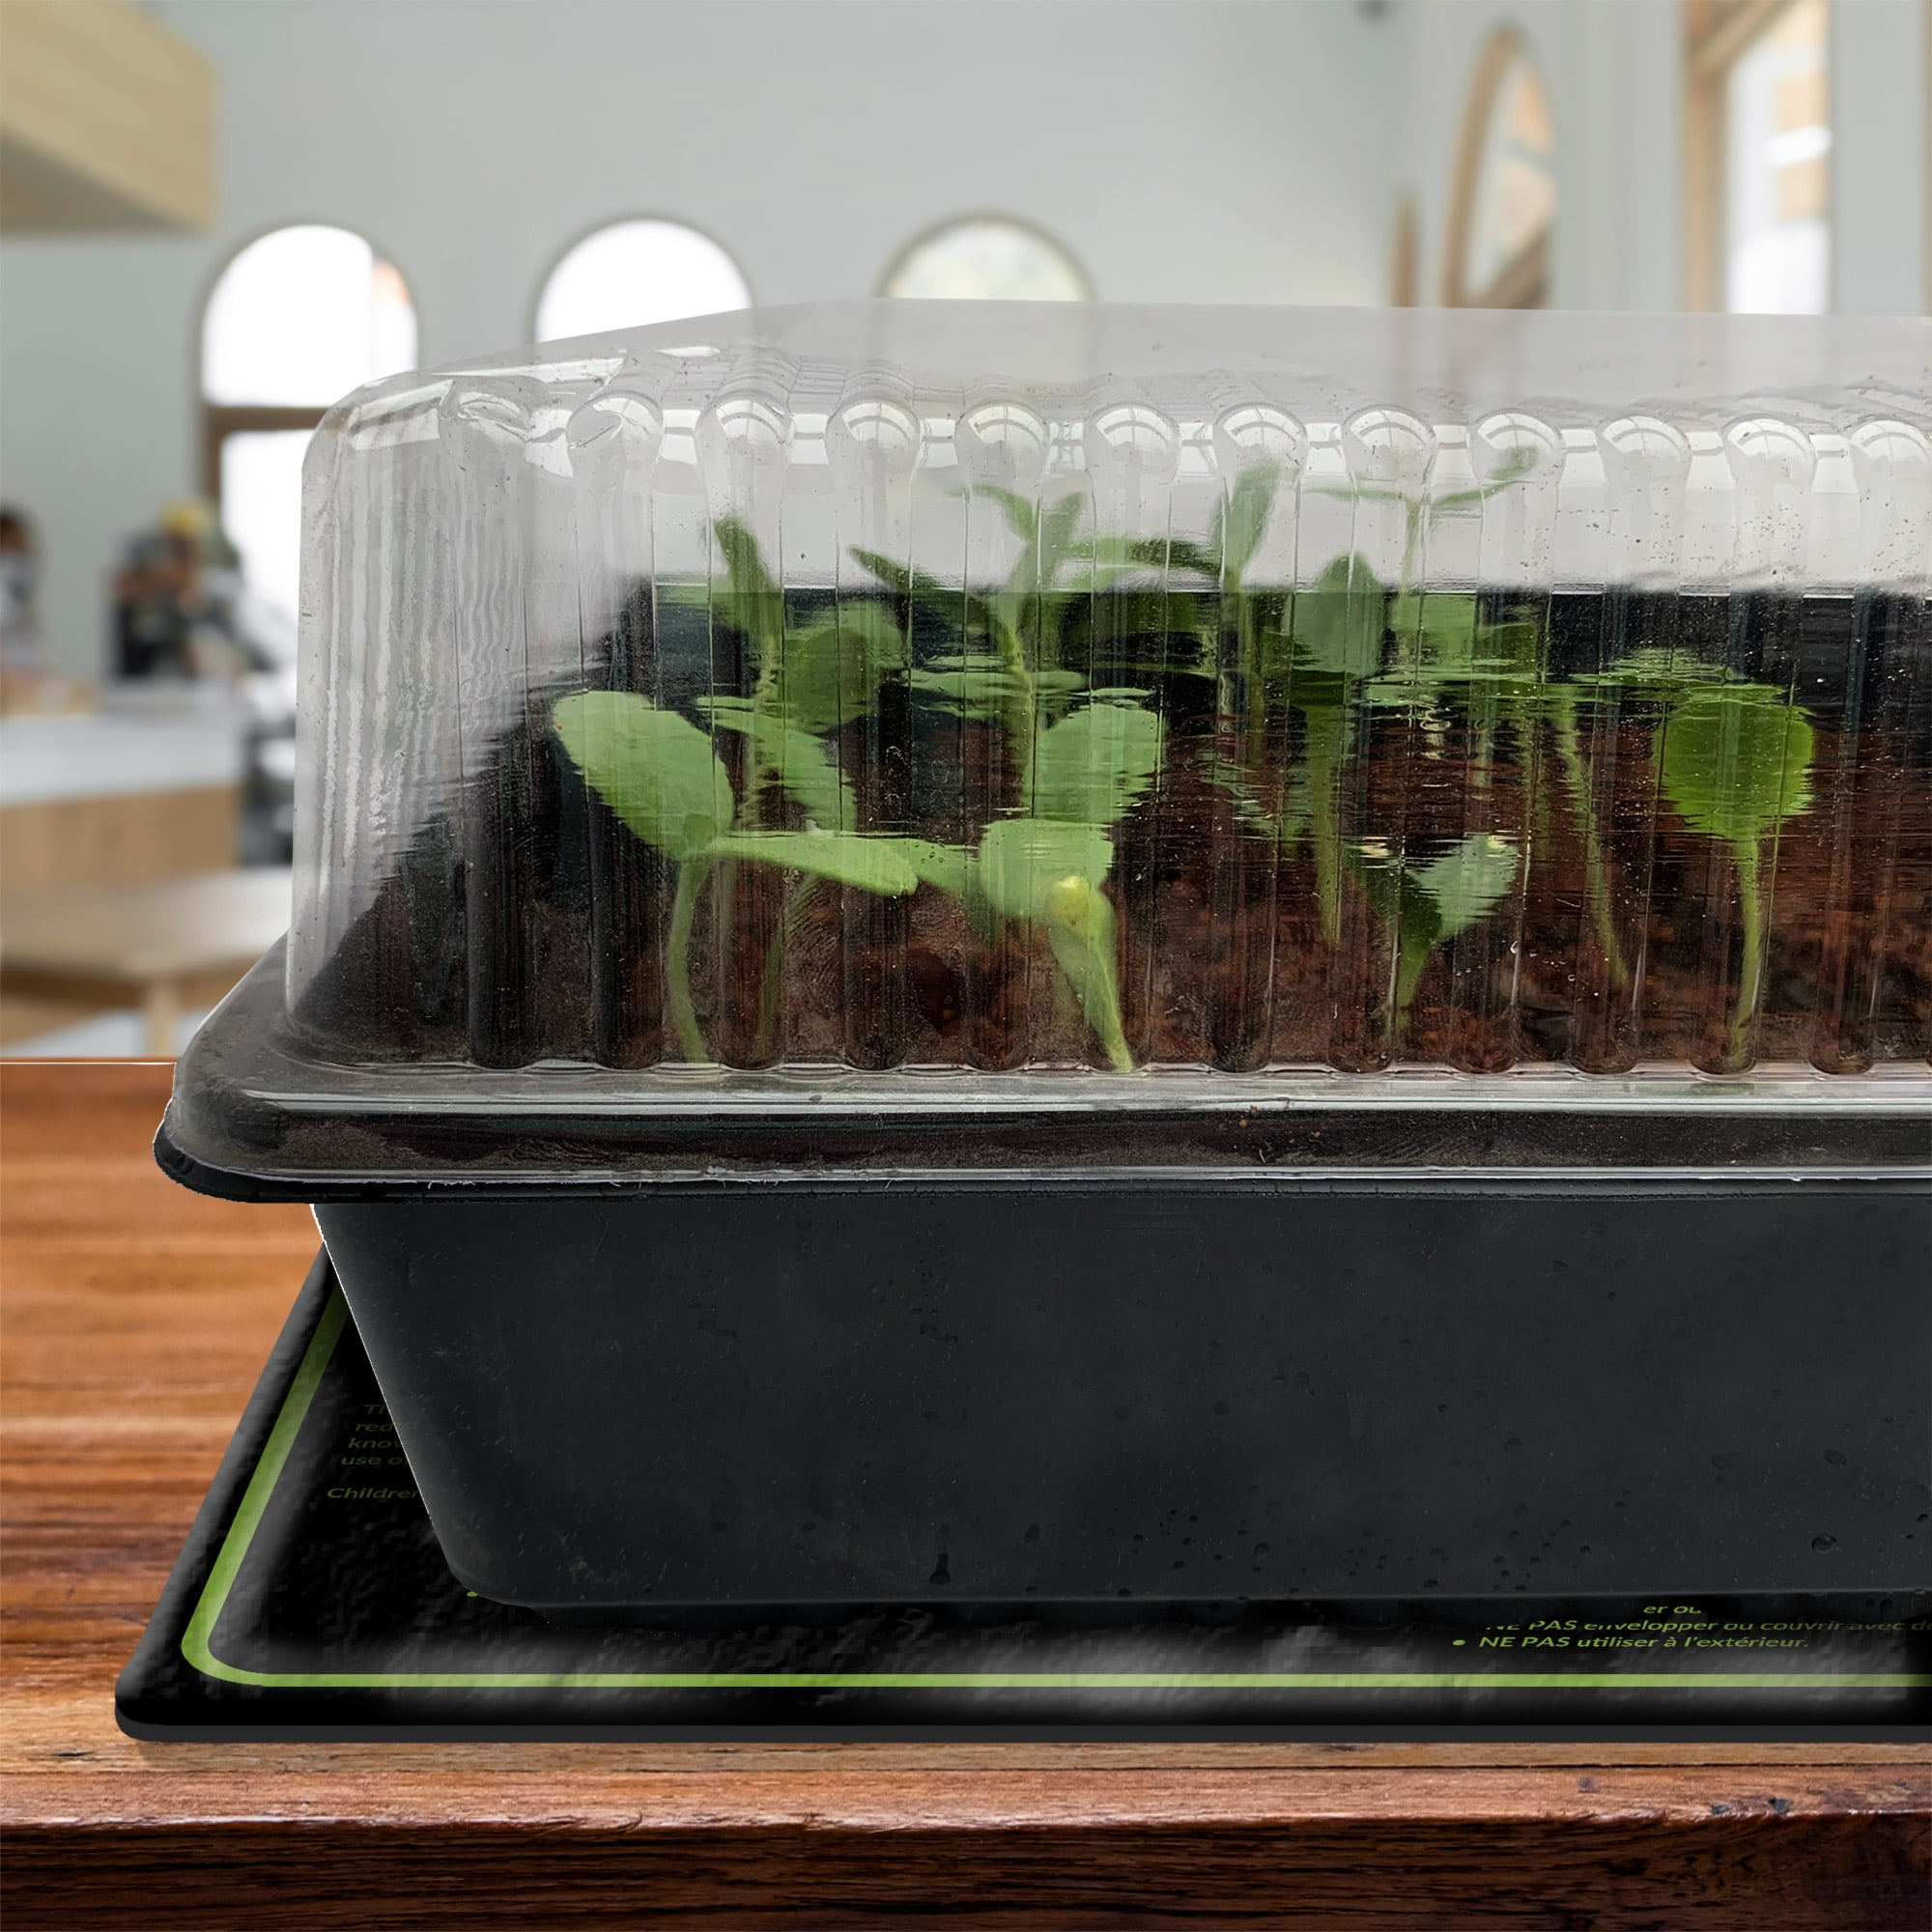 Ferry~Morse Heat Mats and Grow Lights Make Germinating Seeds Indoors Easy –  Ferry-Morse